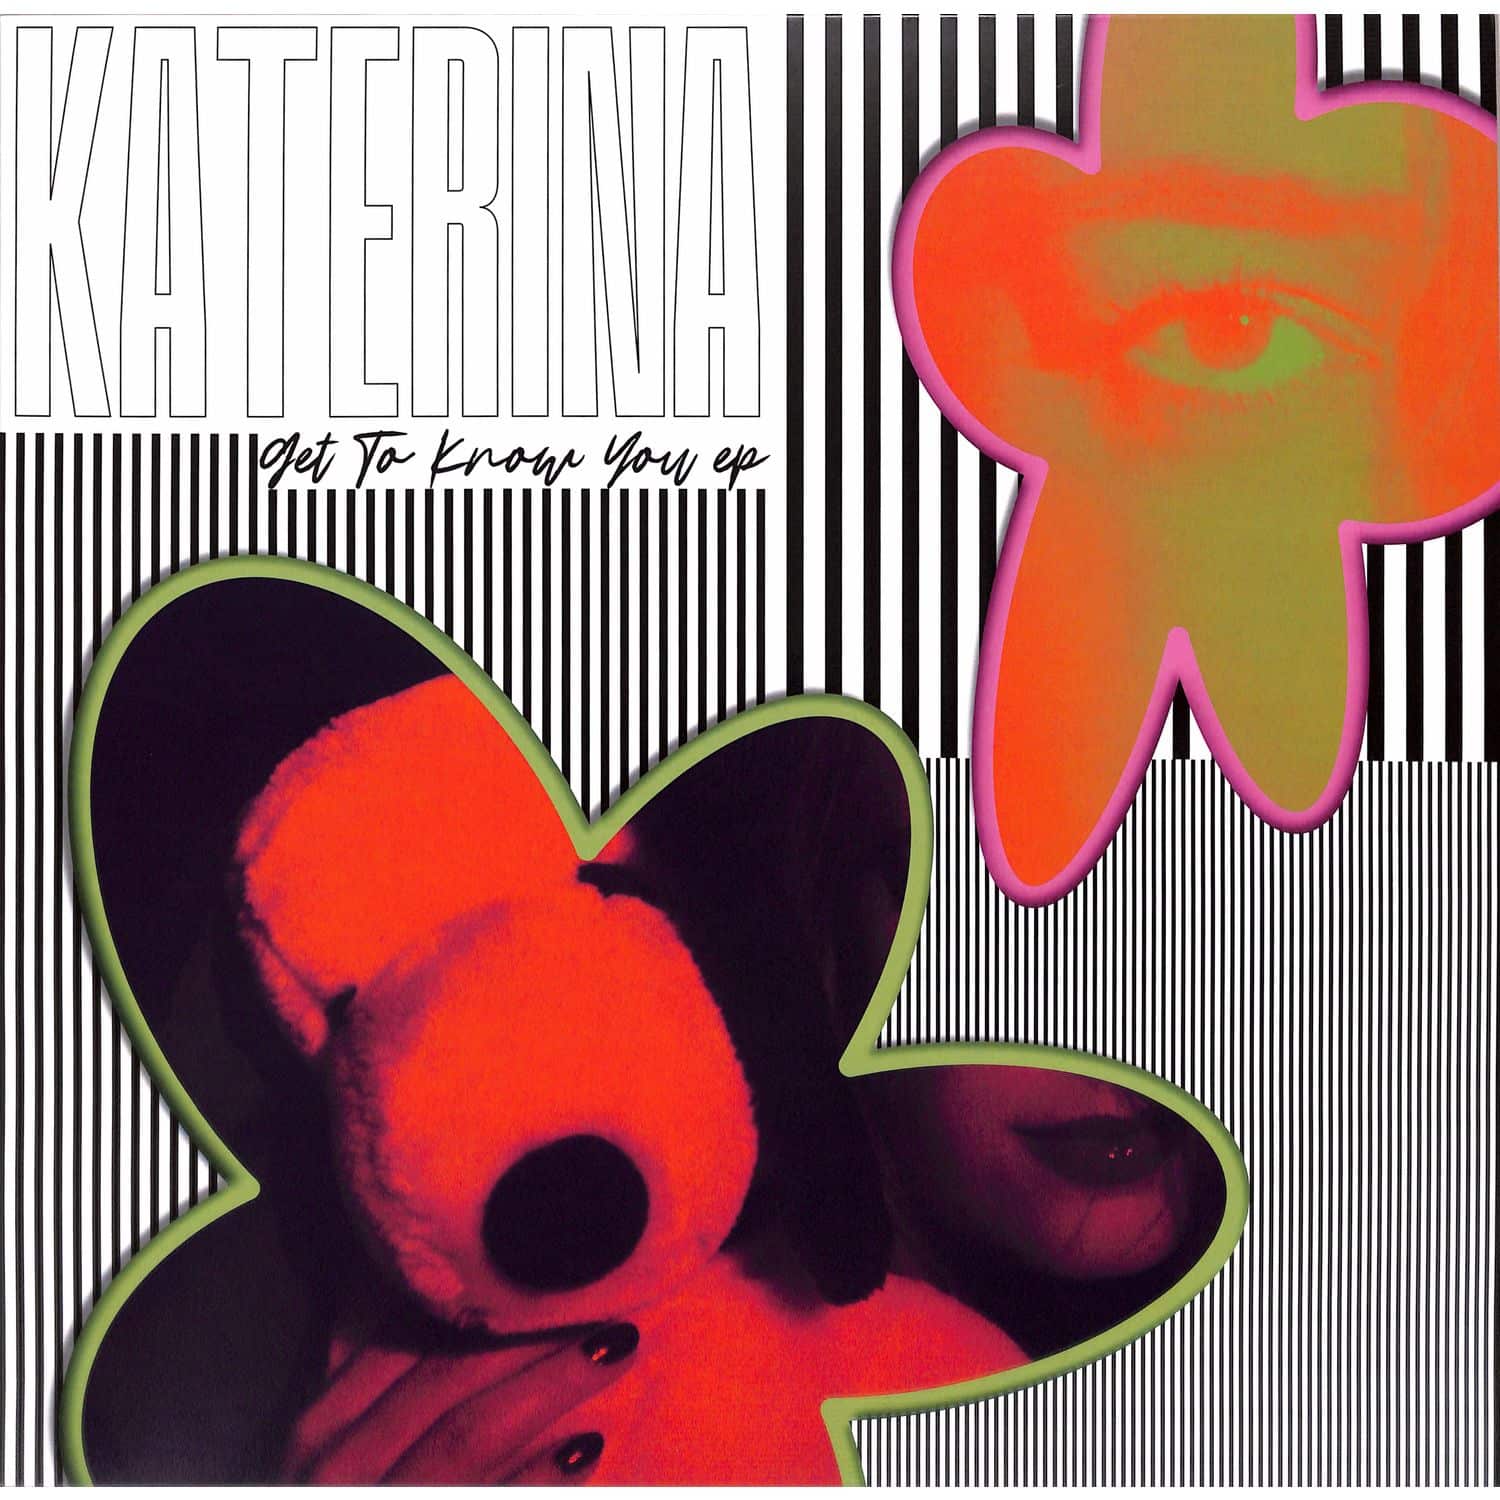 Katerina - GET TO KNOW YOU EP